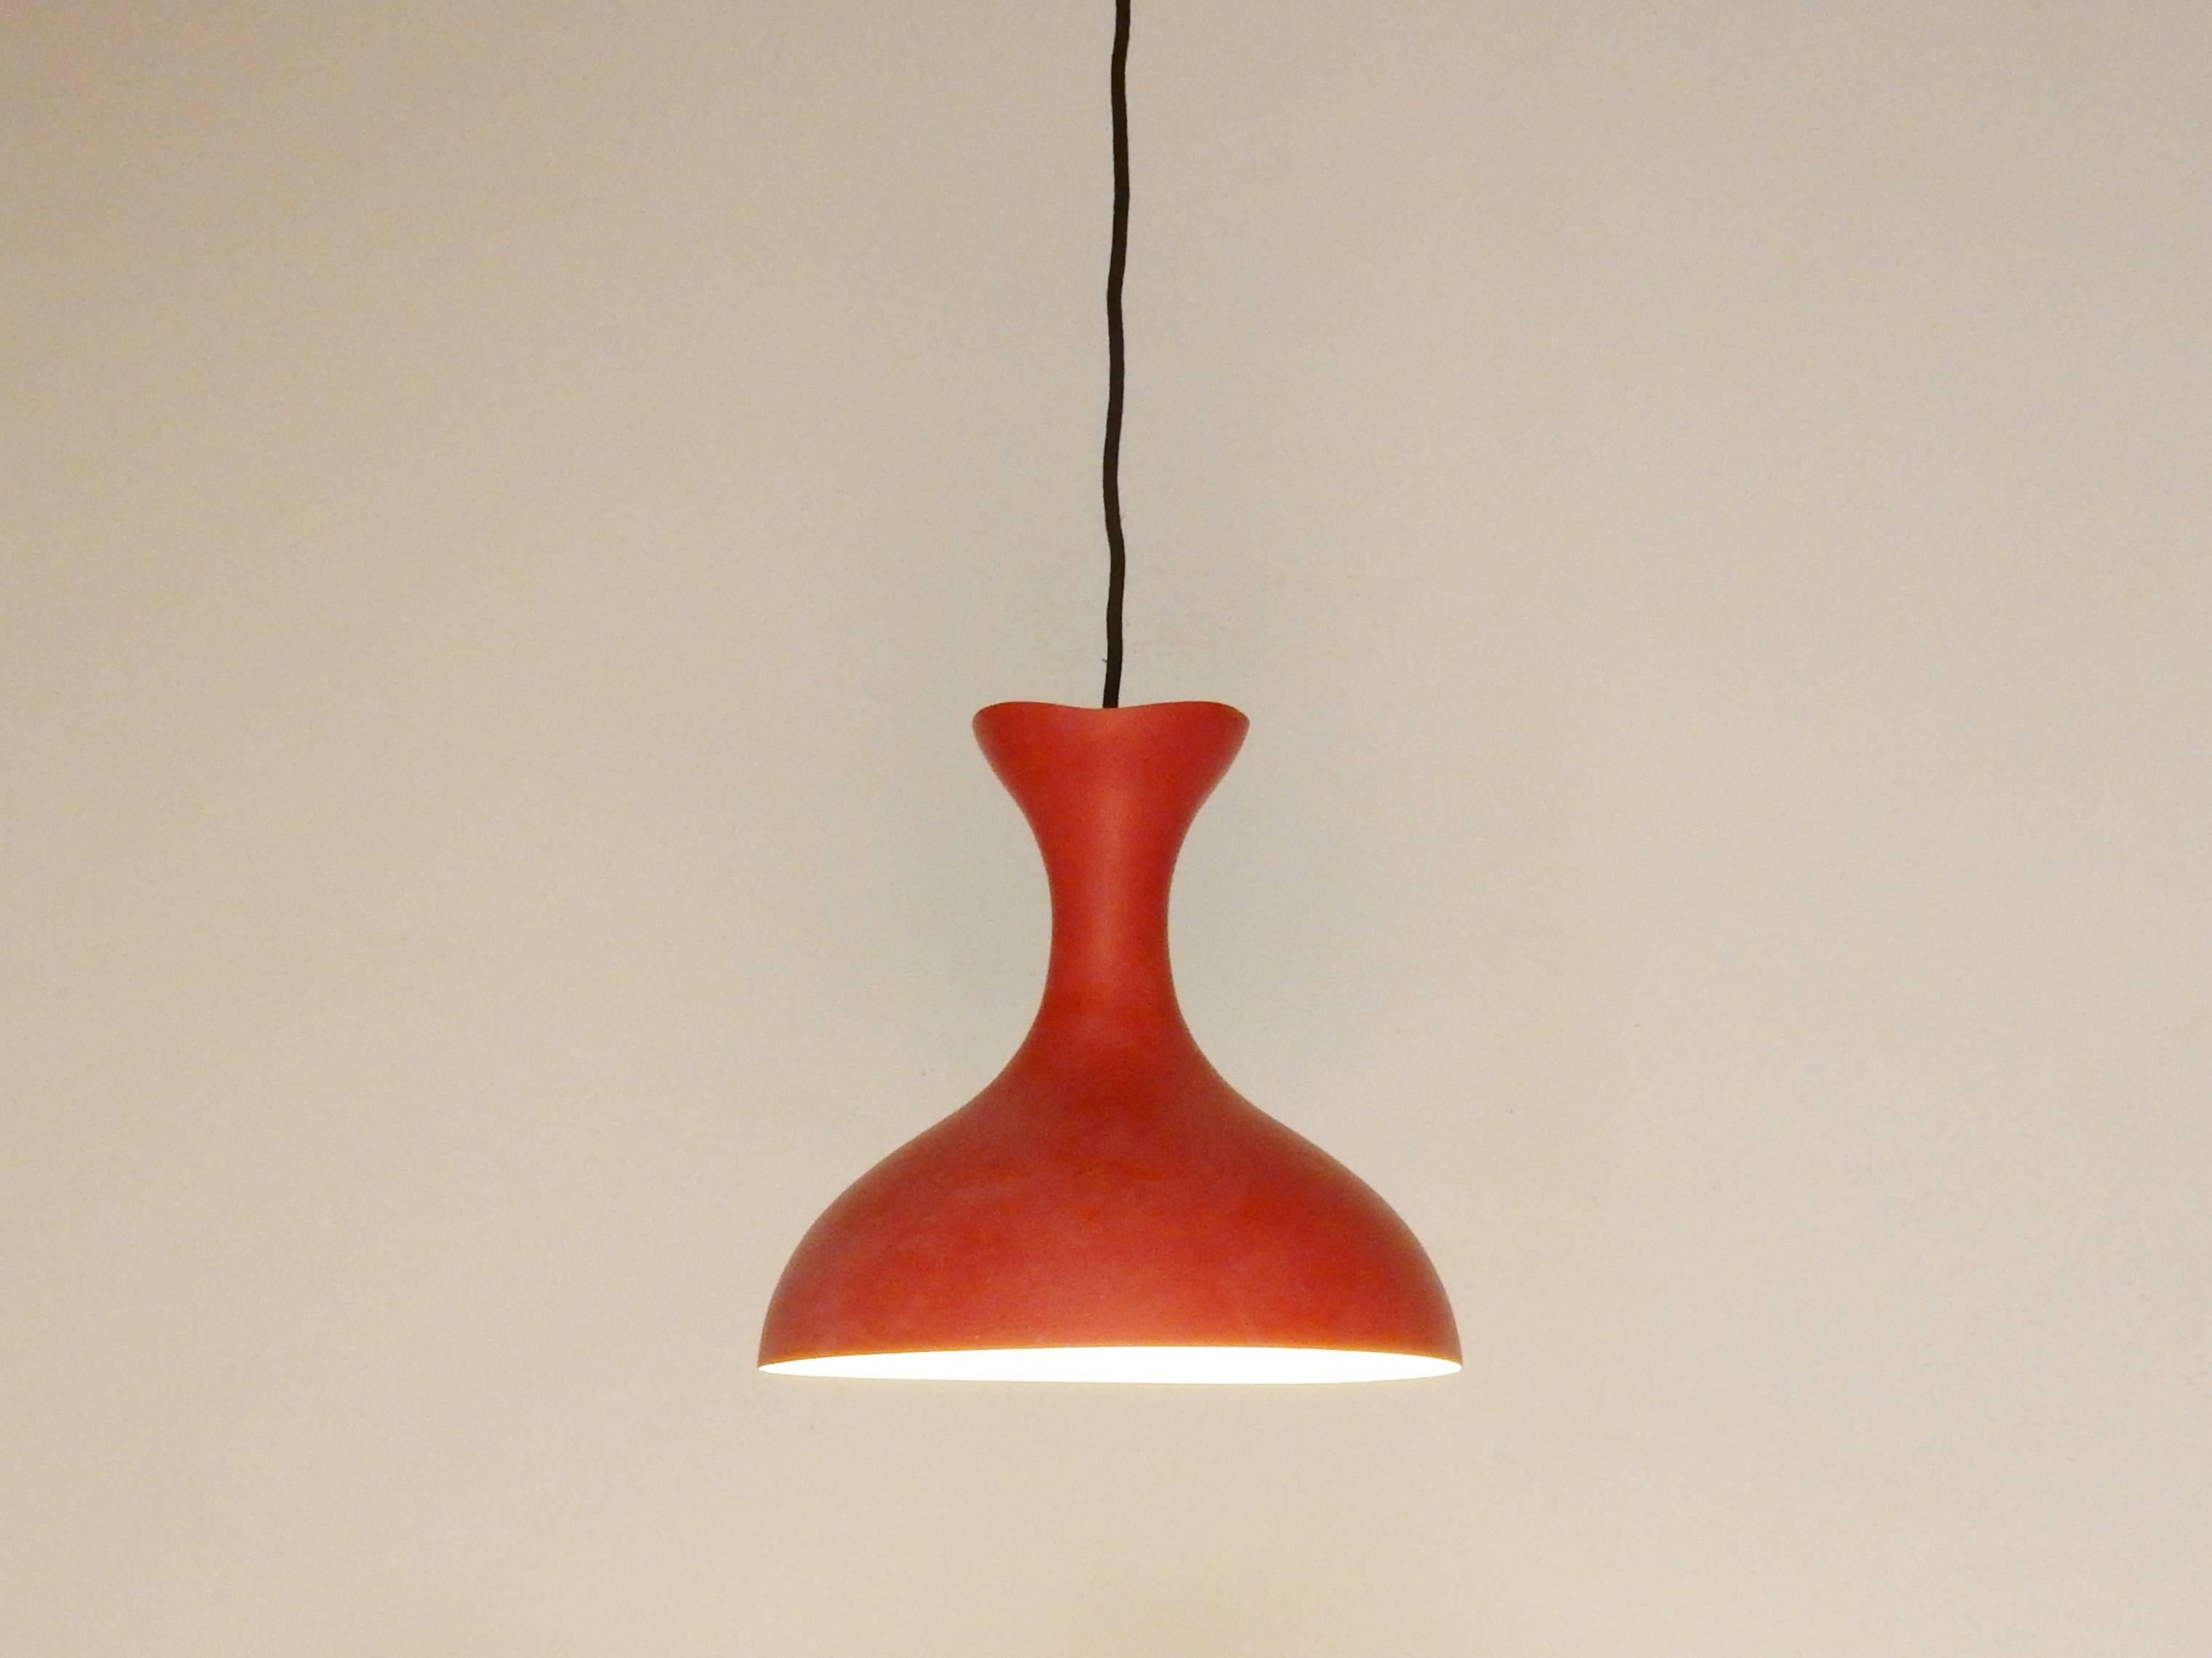 Lacquered Mid-Century Scandinavian Pendant Light in a Beautiful Old Red Color